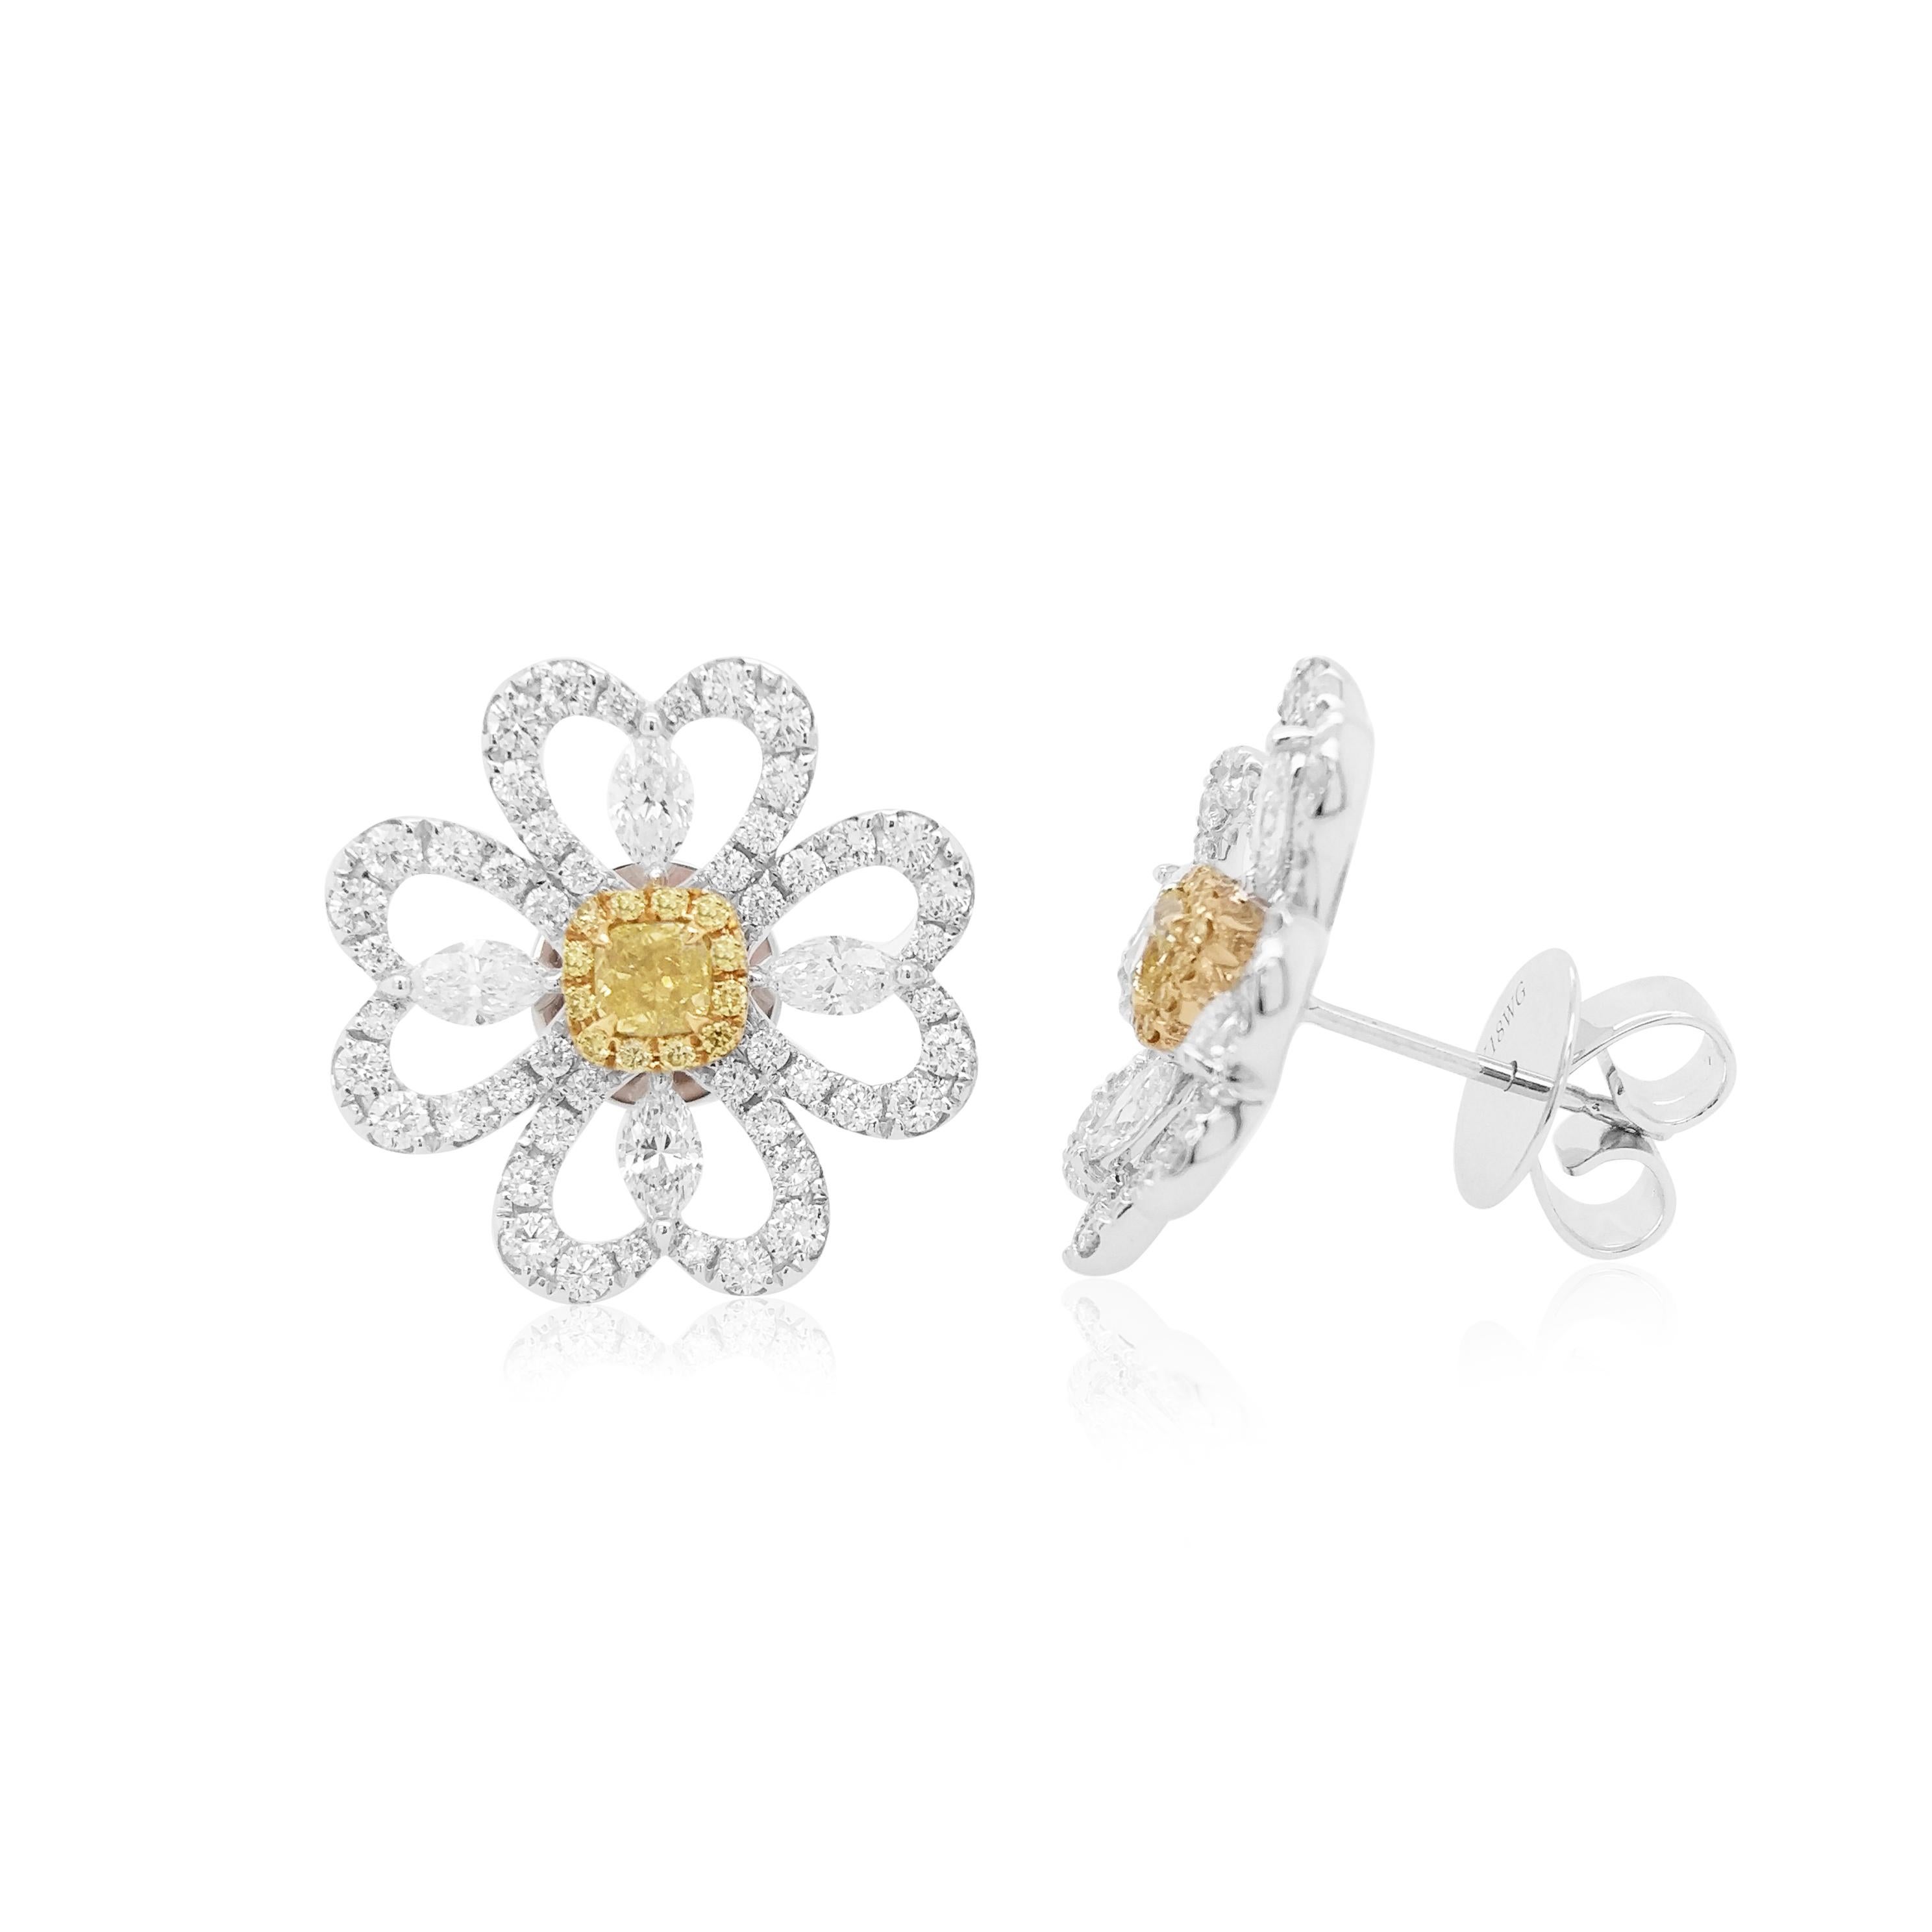 These unique flower shaped earrings feature natural Cushion-shape Yellow diamonds at the heart of their design. The rich colour of these diamonds is complimented perfectly by the delicate 18 Karat white gold floral design which completed by a